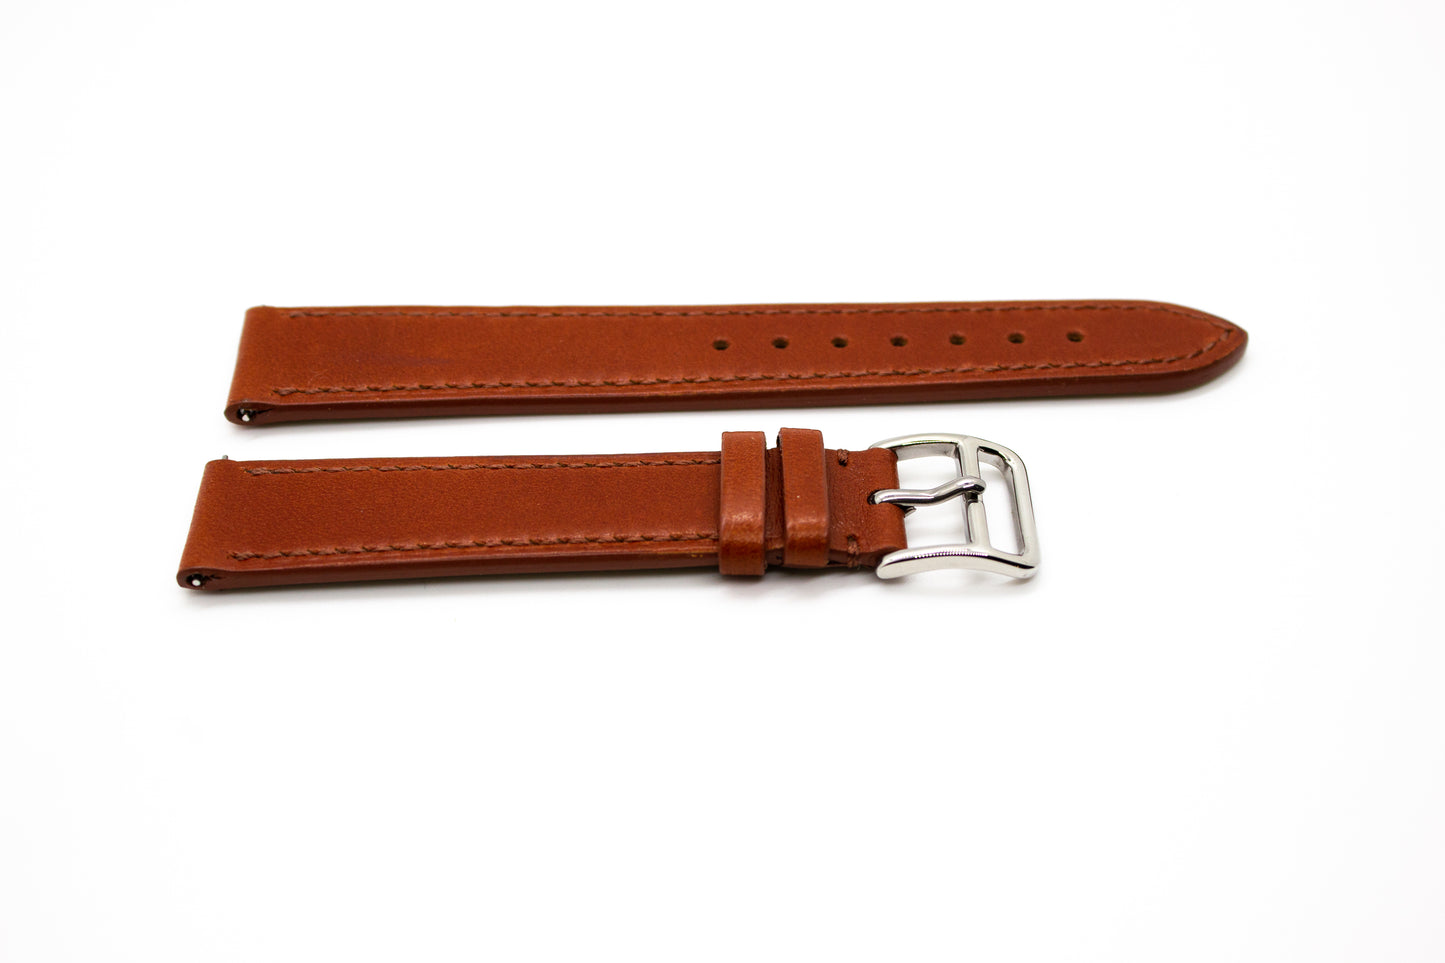 The Milbrook Watch Strap in Whiskey Brown